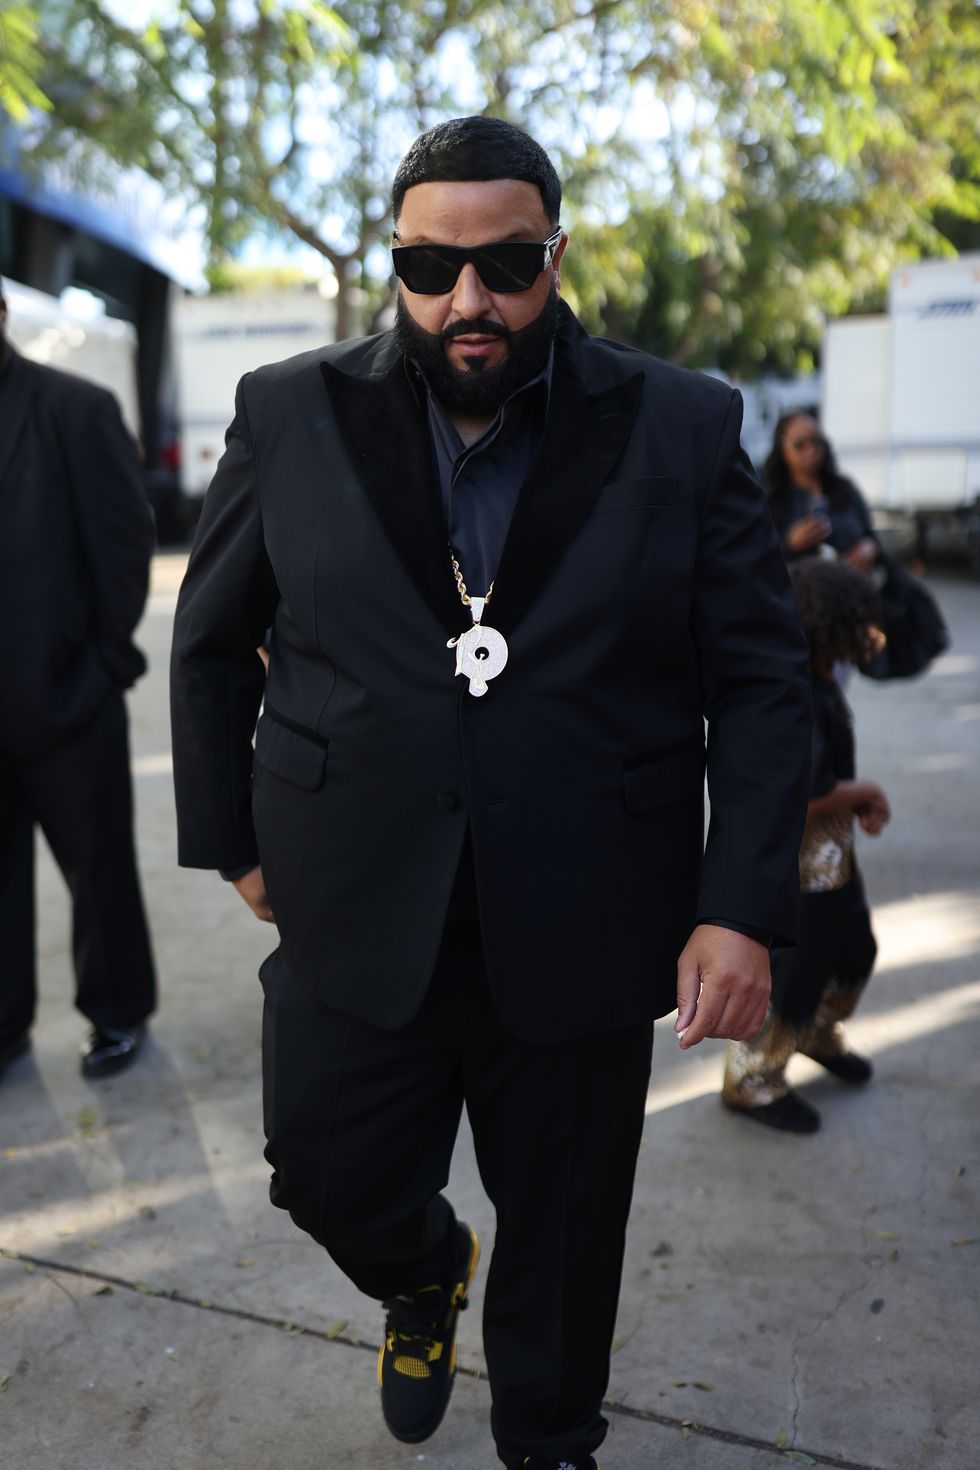 dj khaled, fully suited and ready to go